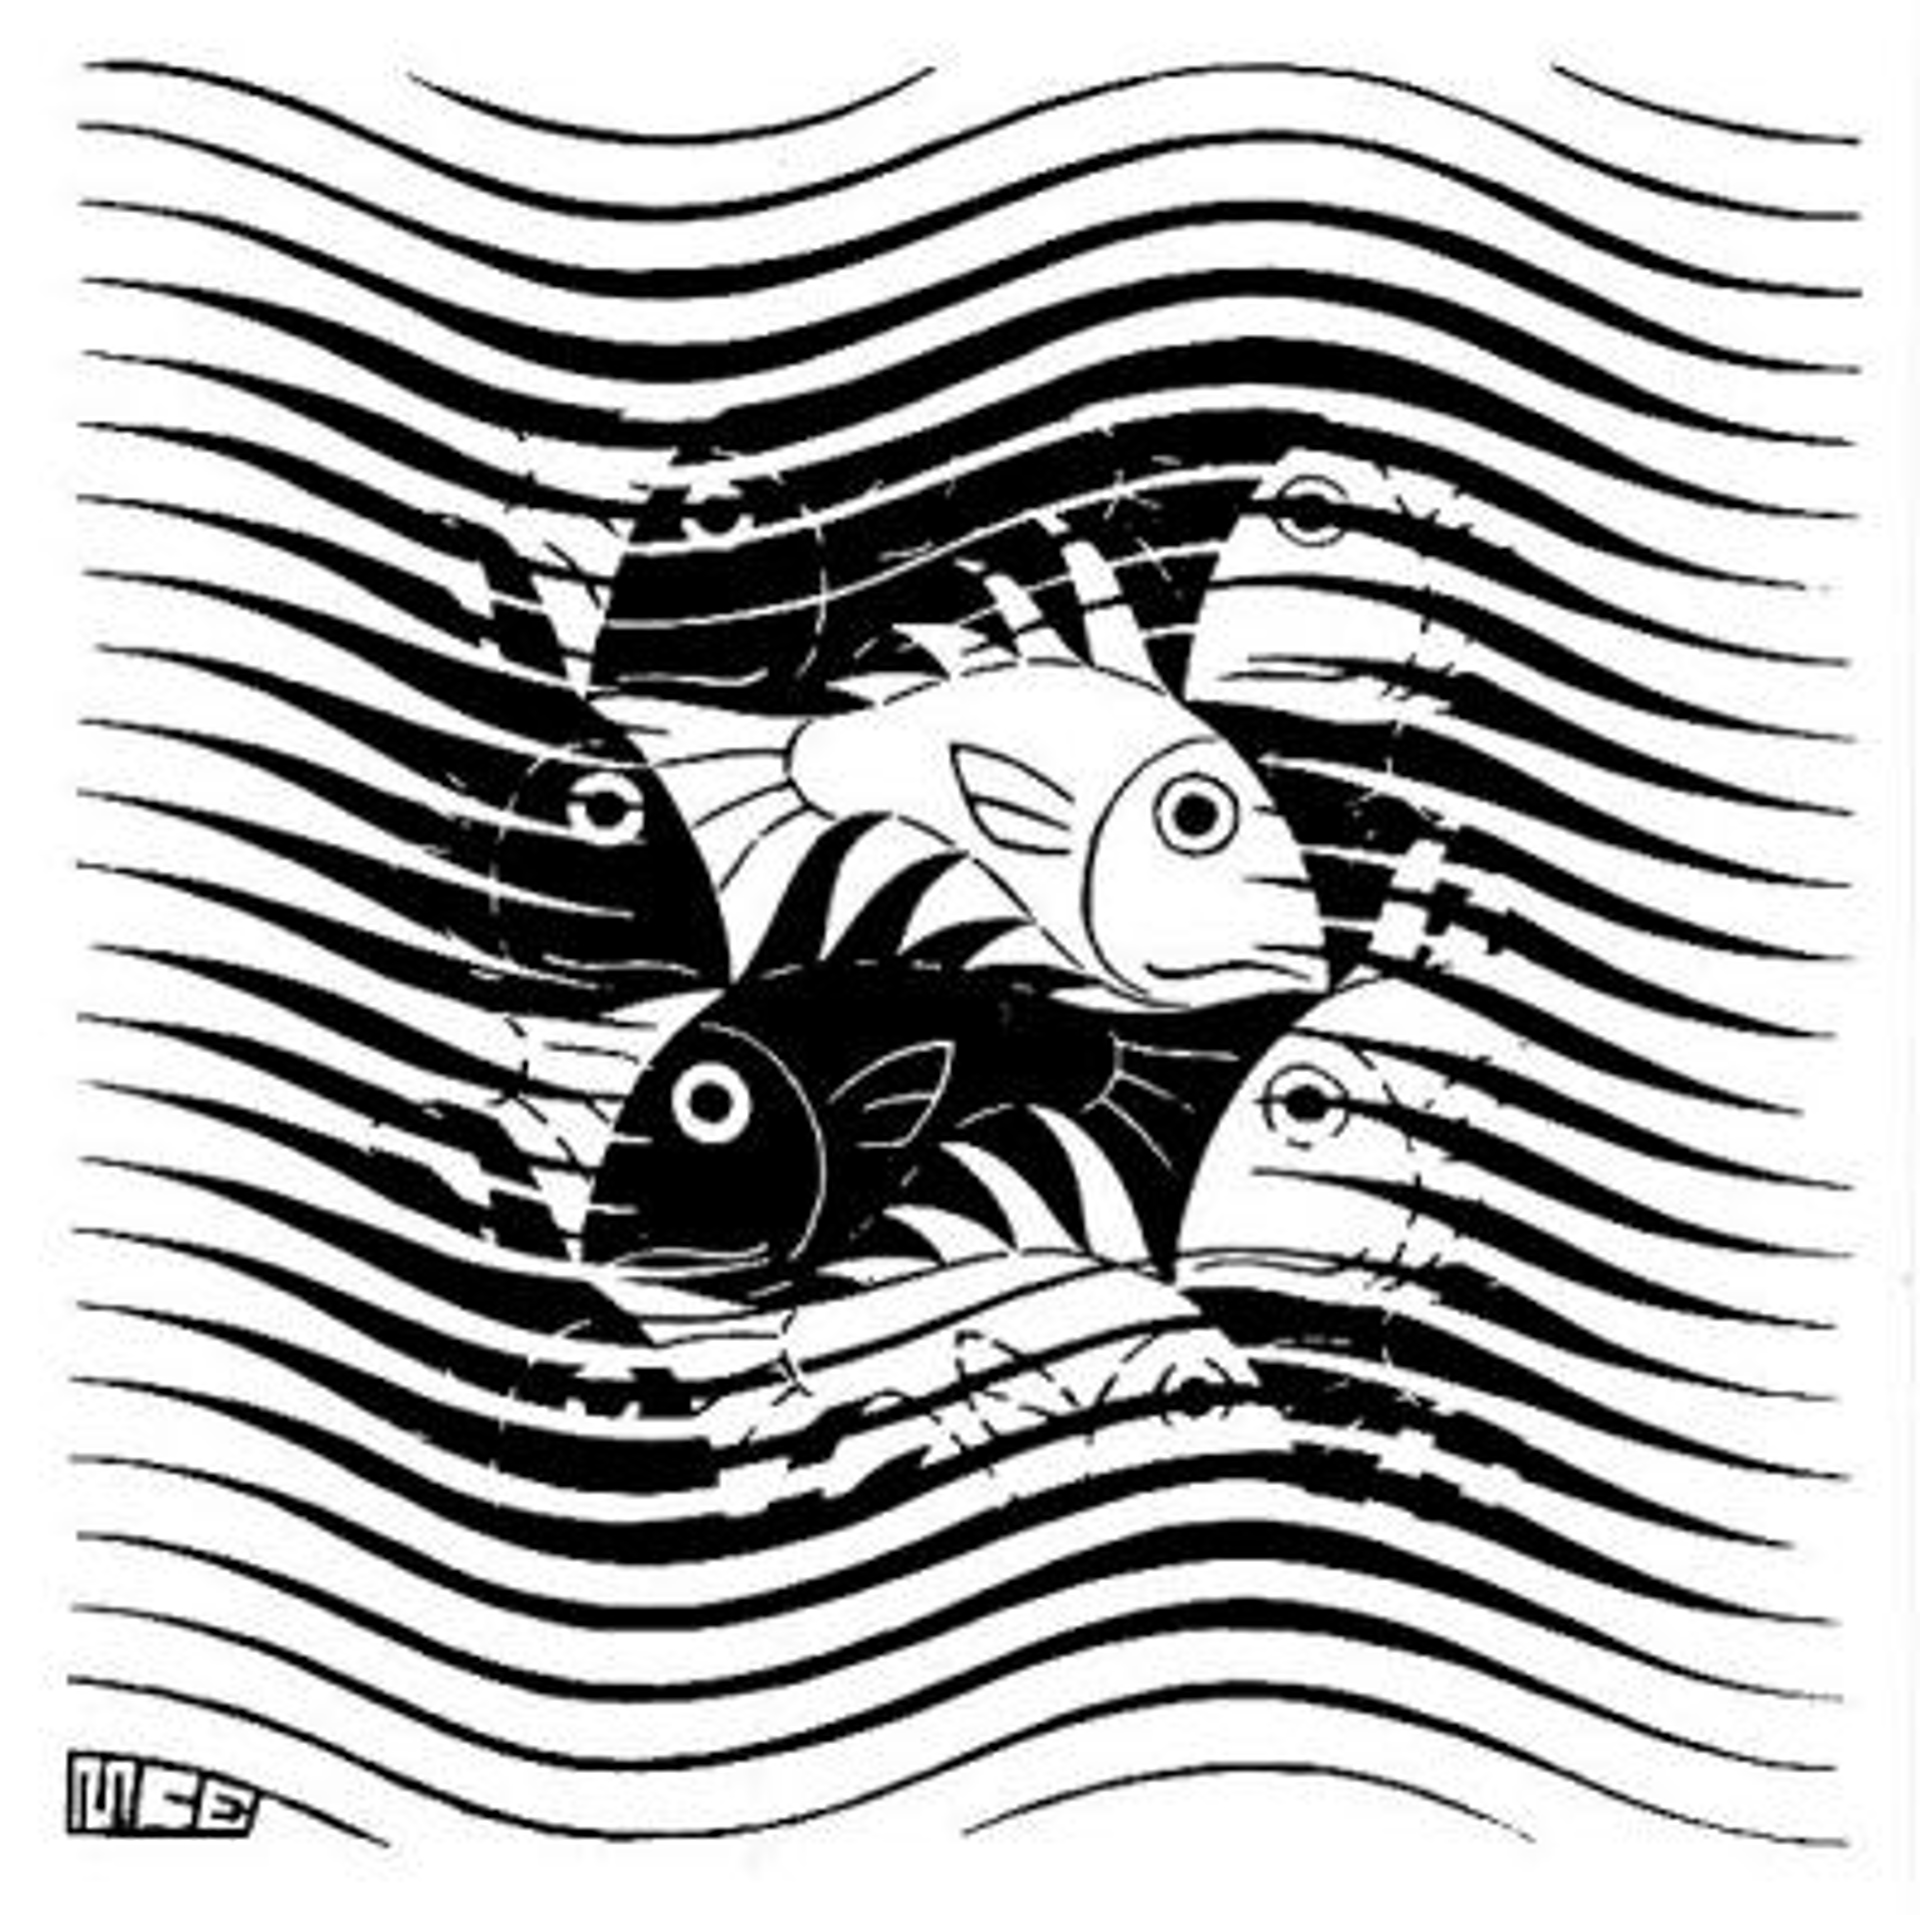 Fish and Waves by M.C. Escher